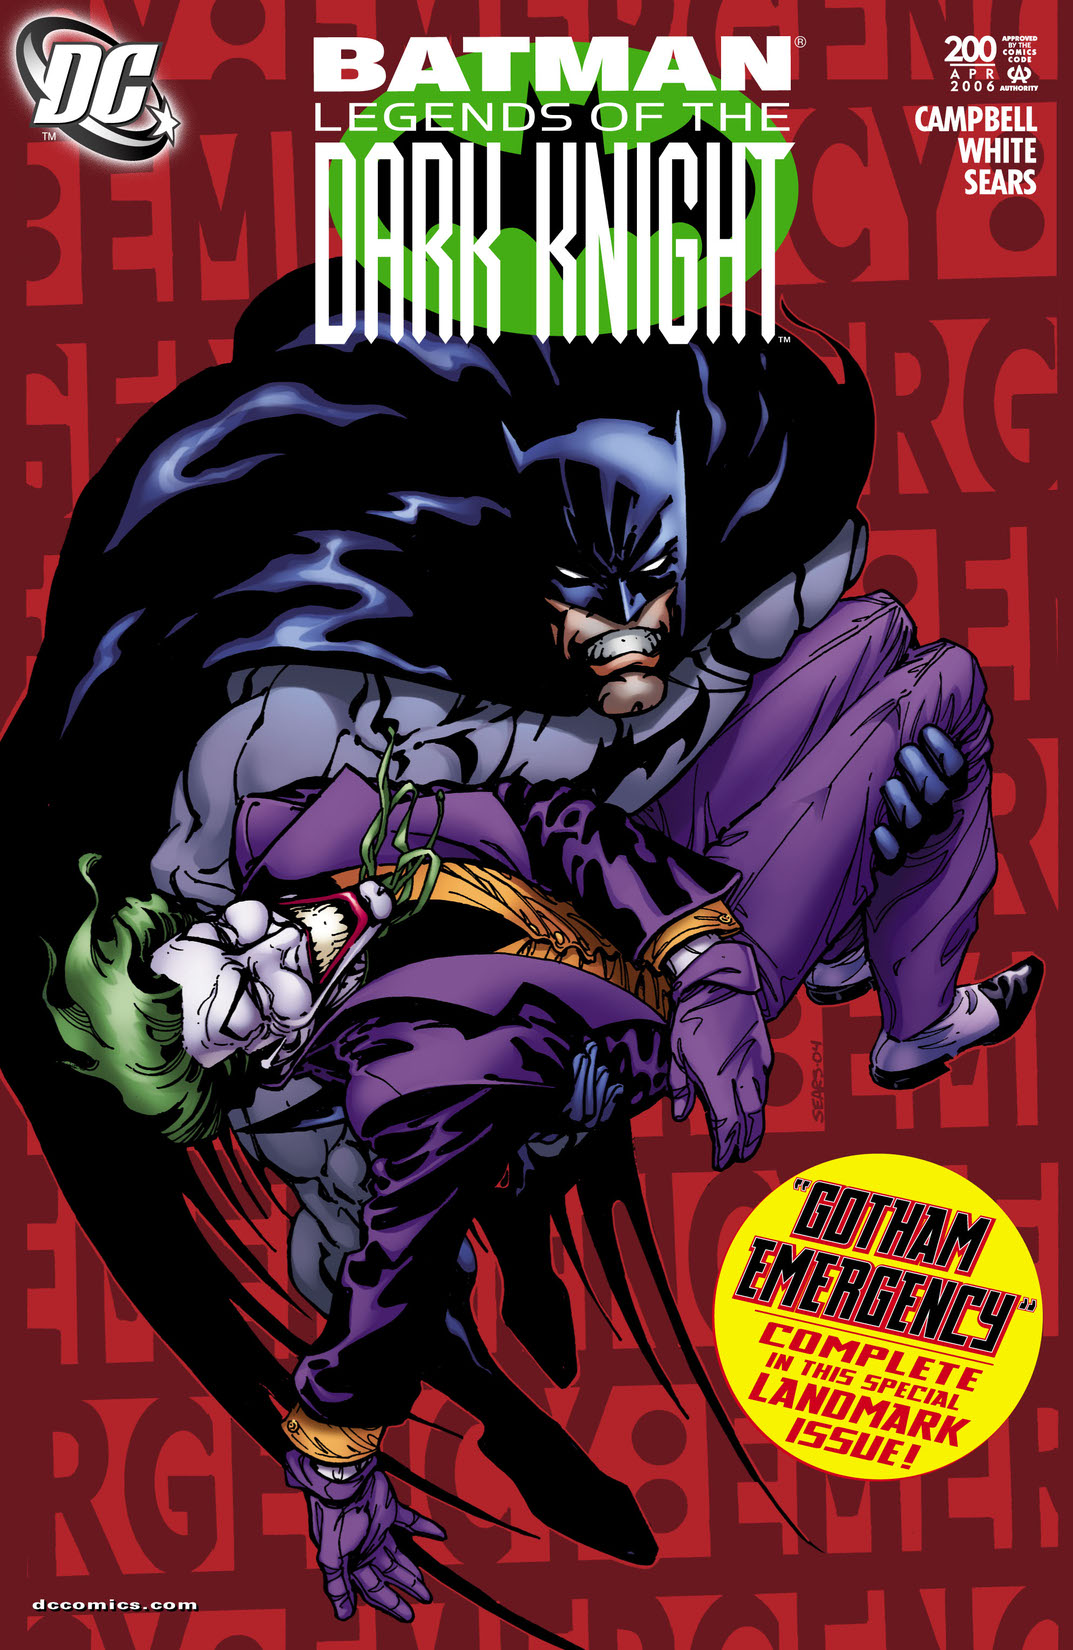 Batman: Legends of the Dark Knight #200 preview images